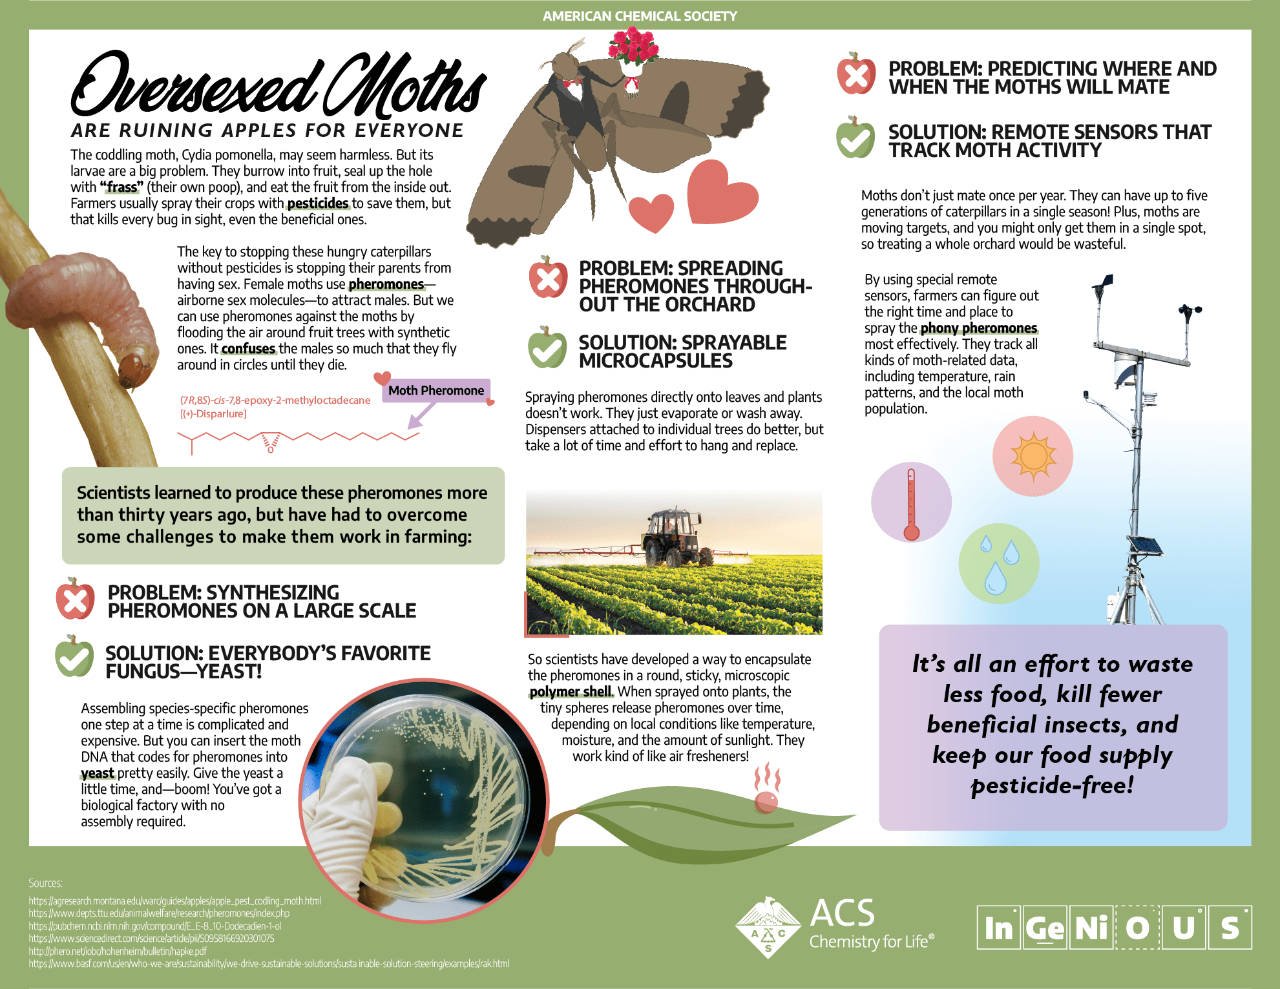 Oversexed Moths Are Ruining Apples for Everyone: Infographic